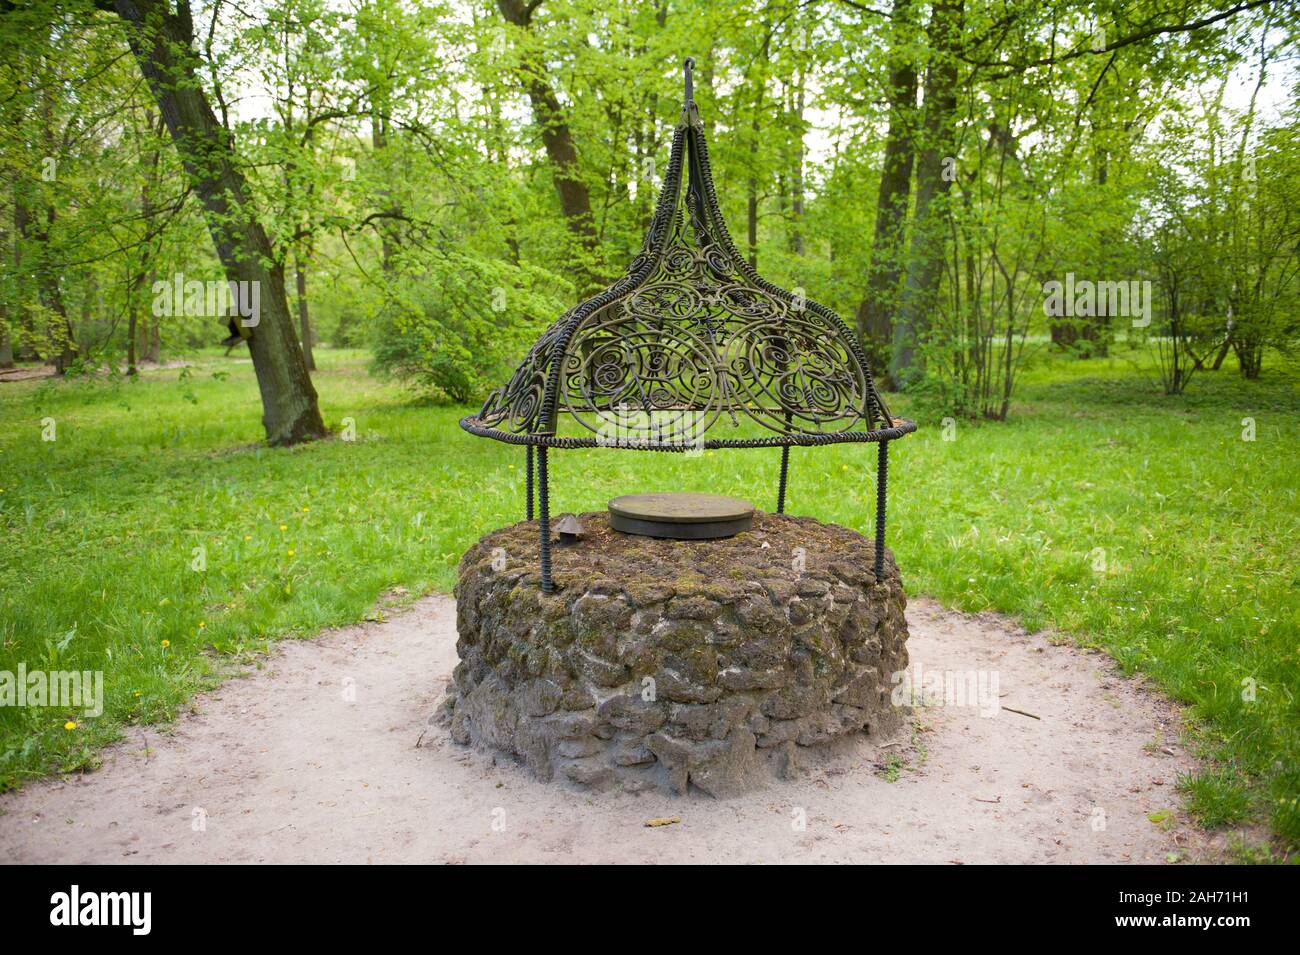 Wrought iron well next to Margraves House building in the Romantic Park in Arkadia, Poland, Europe, visiting tourist travel destinations, sightseeing Stock Photo